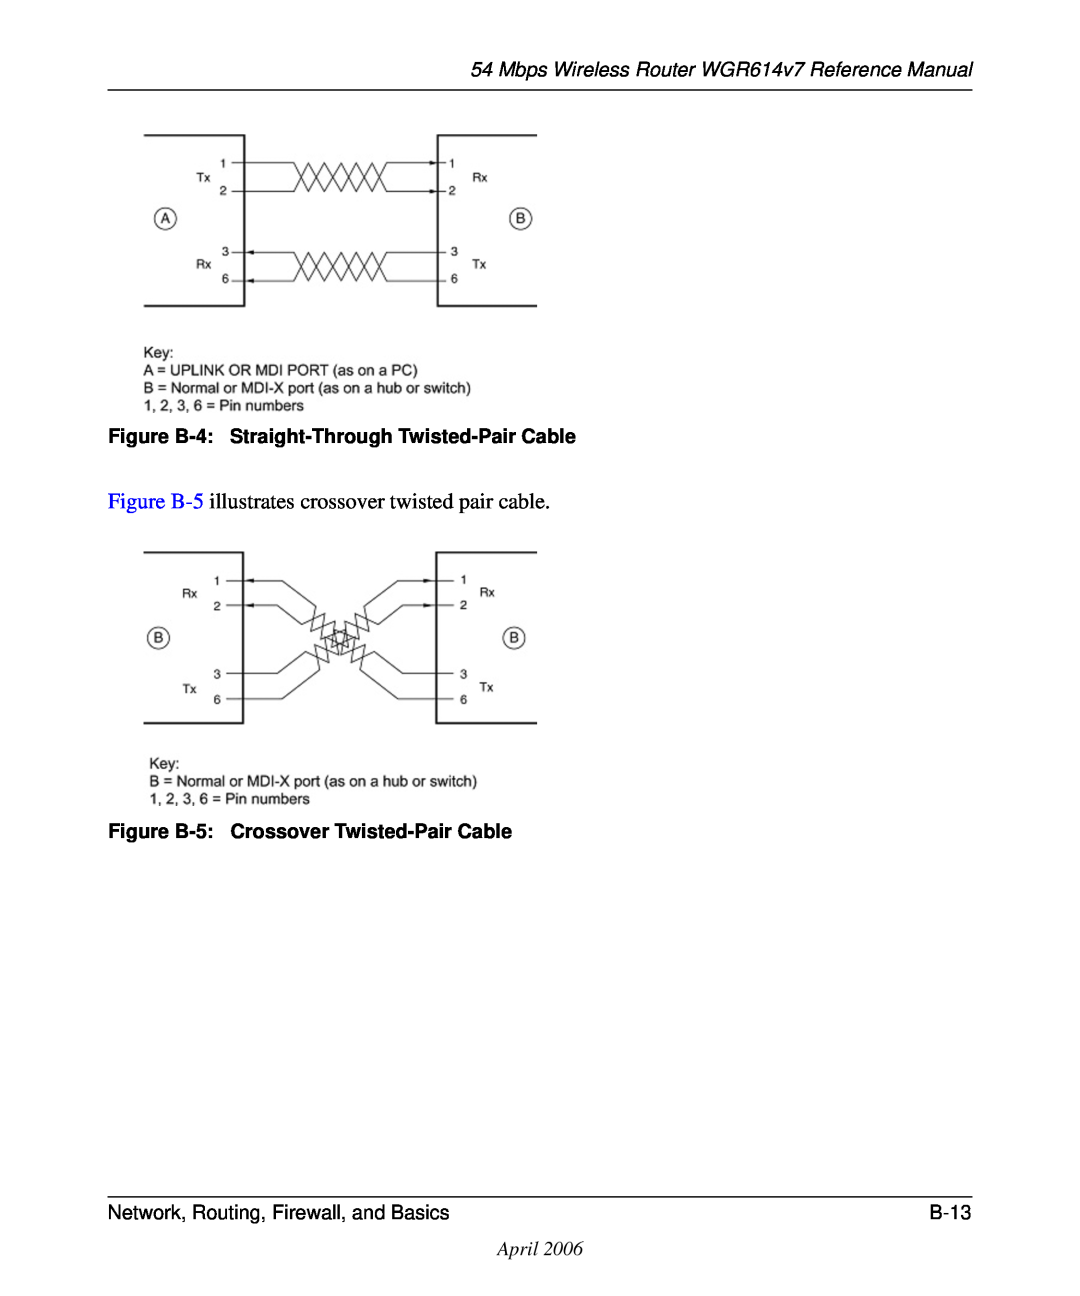 NETGEAR Figure B-5 illustrates crossover twisted pair cable, Mbps Wireless Router WGR614v7 Reference Manual, April 